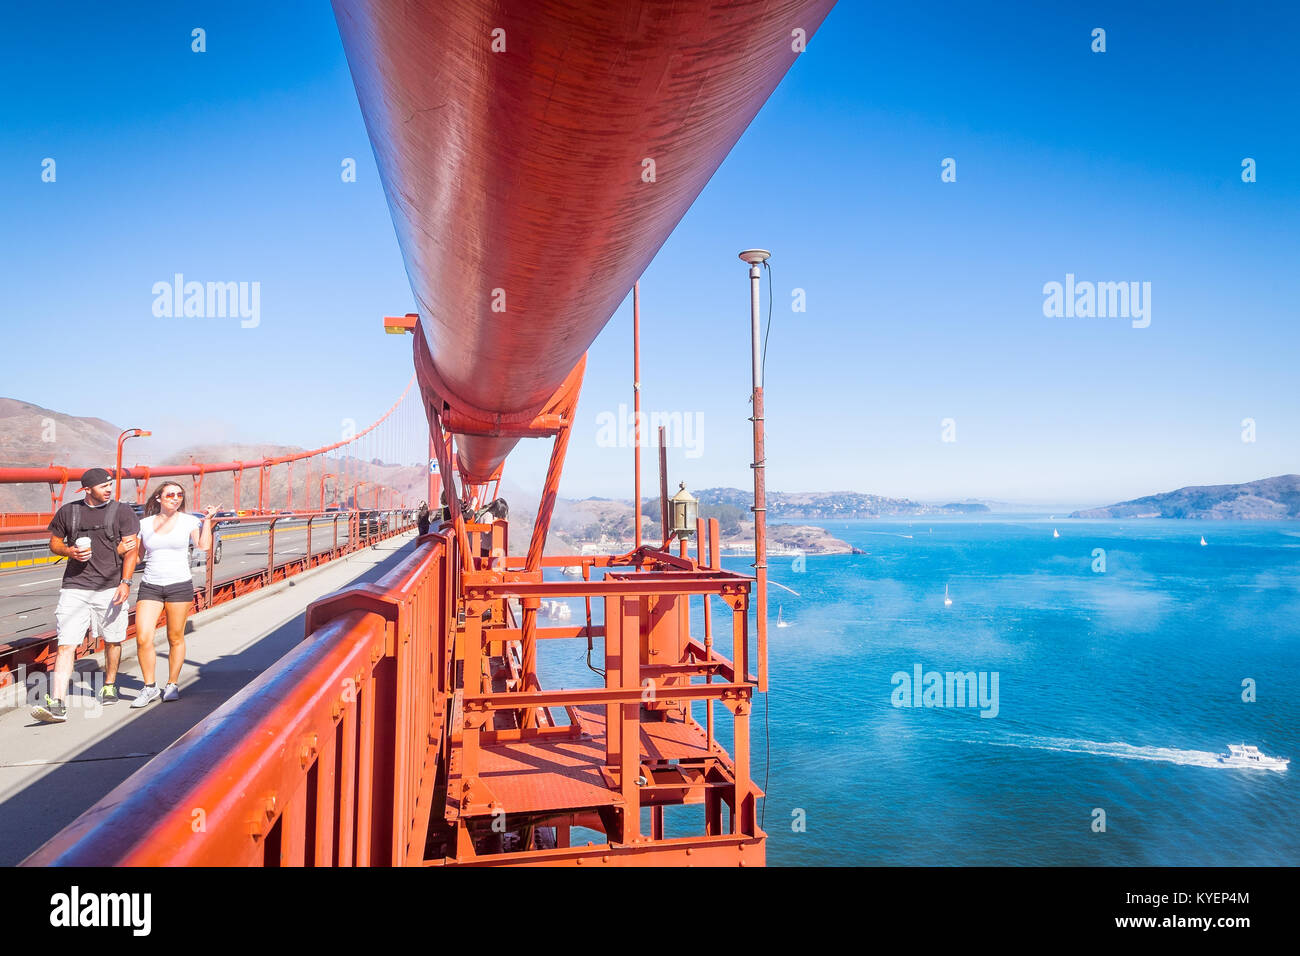 SAN FRANCISCO, CA- Oct. 11, 2015: Golden Gate Bridge on a clear sunny day. Close up view of the massive cable structure that holds up the famous bridg Stock Photo